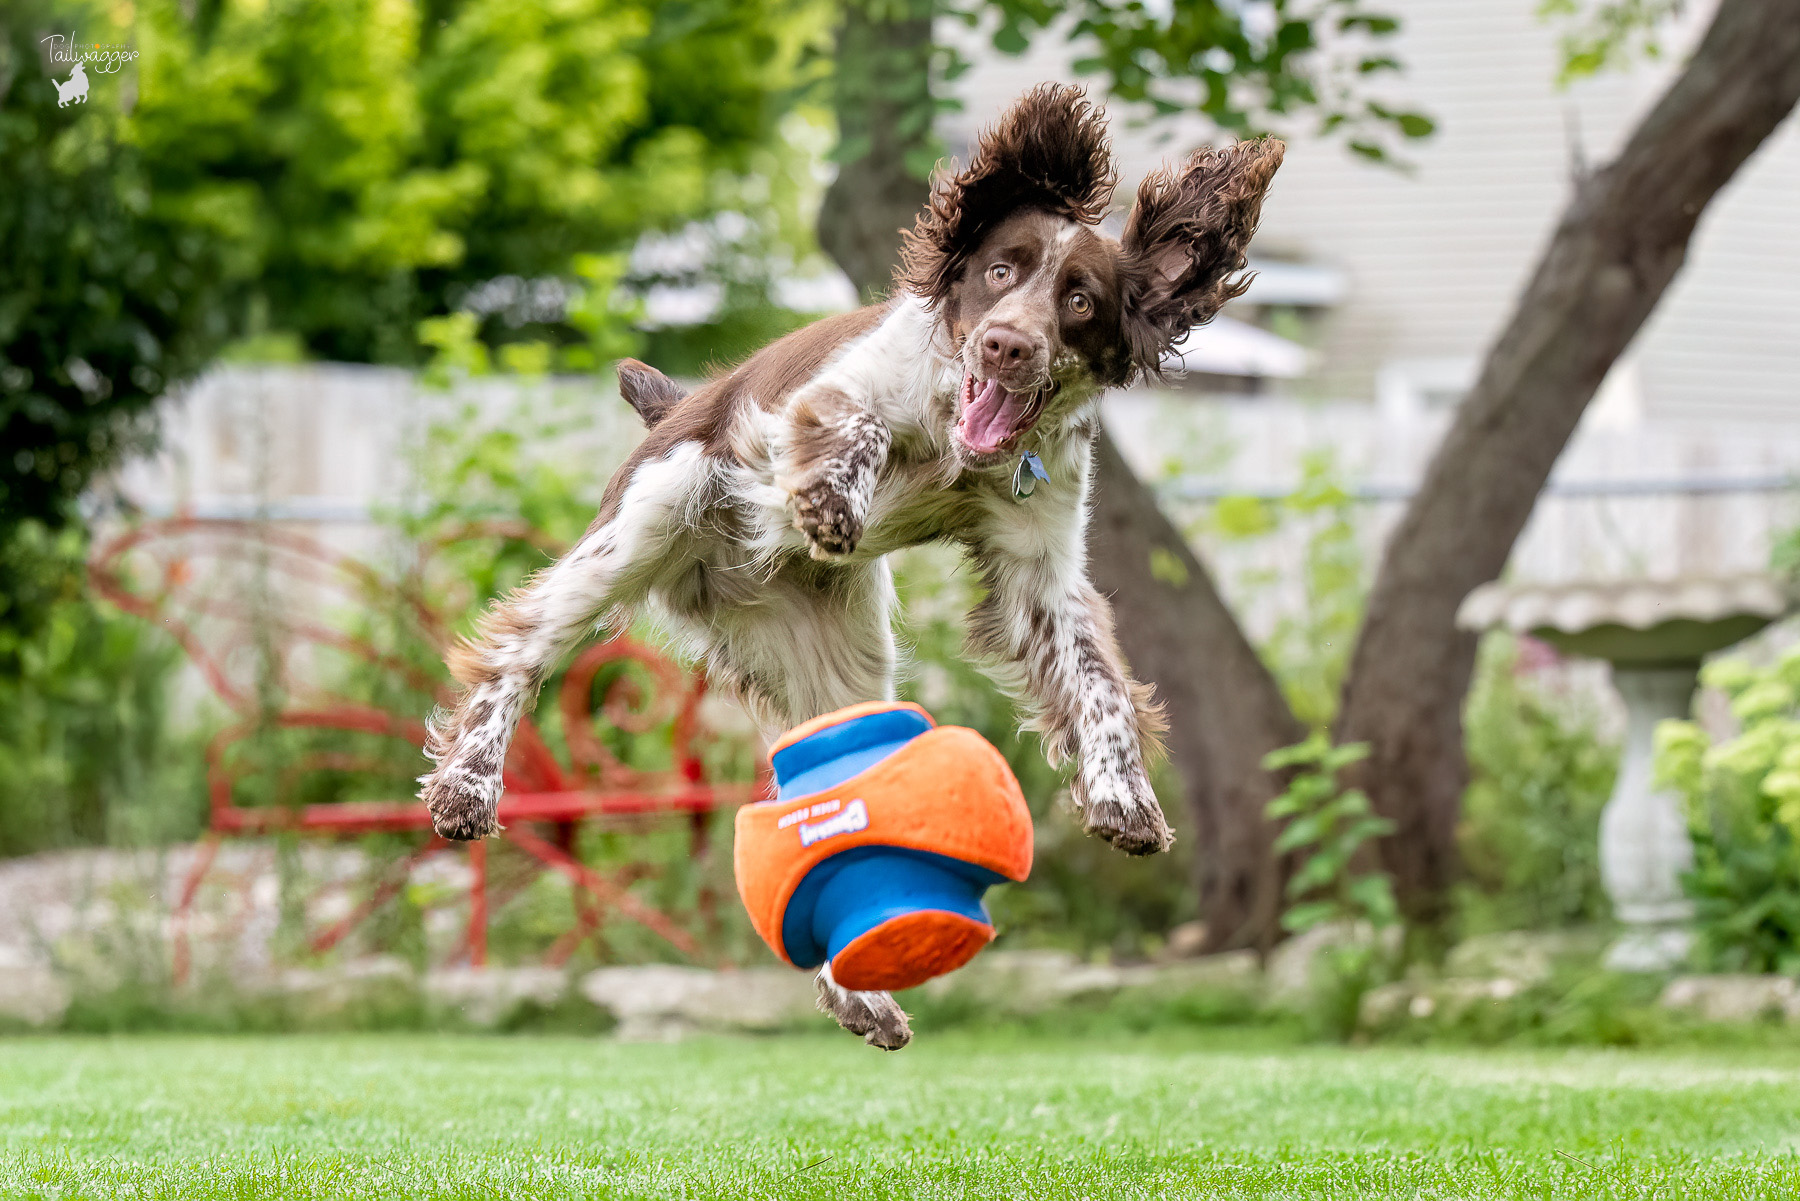 A 6 month old male Springer Spaniel is caught mid-air while chasing his orange and blue ball in Wyoming, MI.